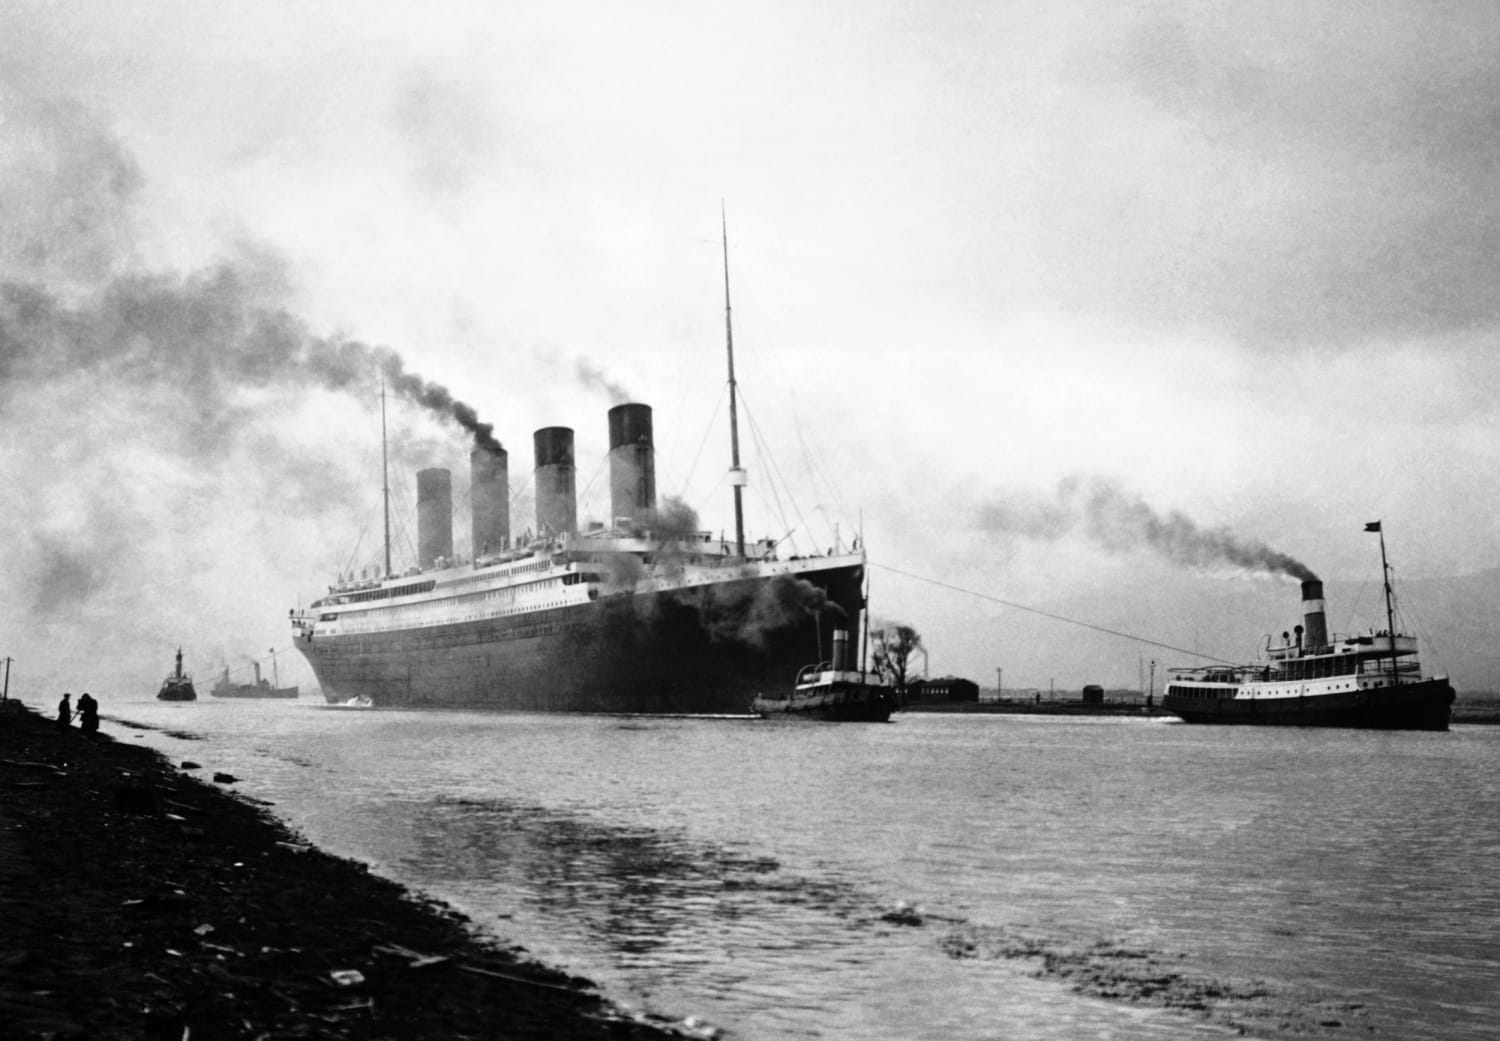 4K images of the Titanic shipwreck reveal a 'partial collapse of hull